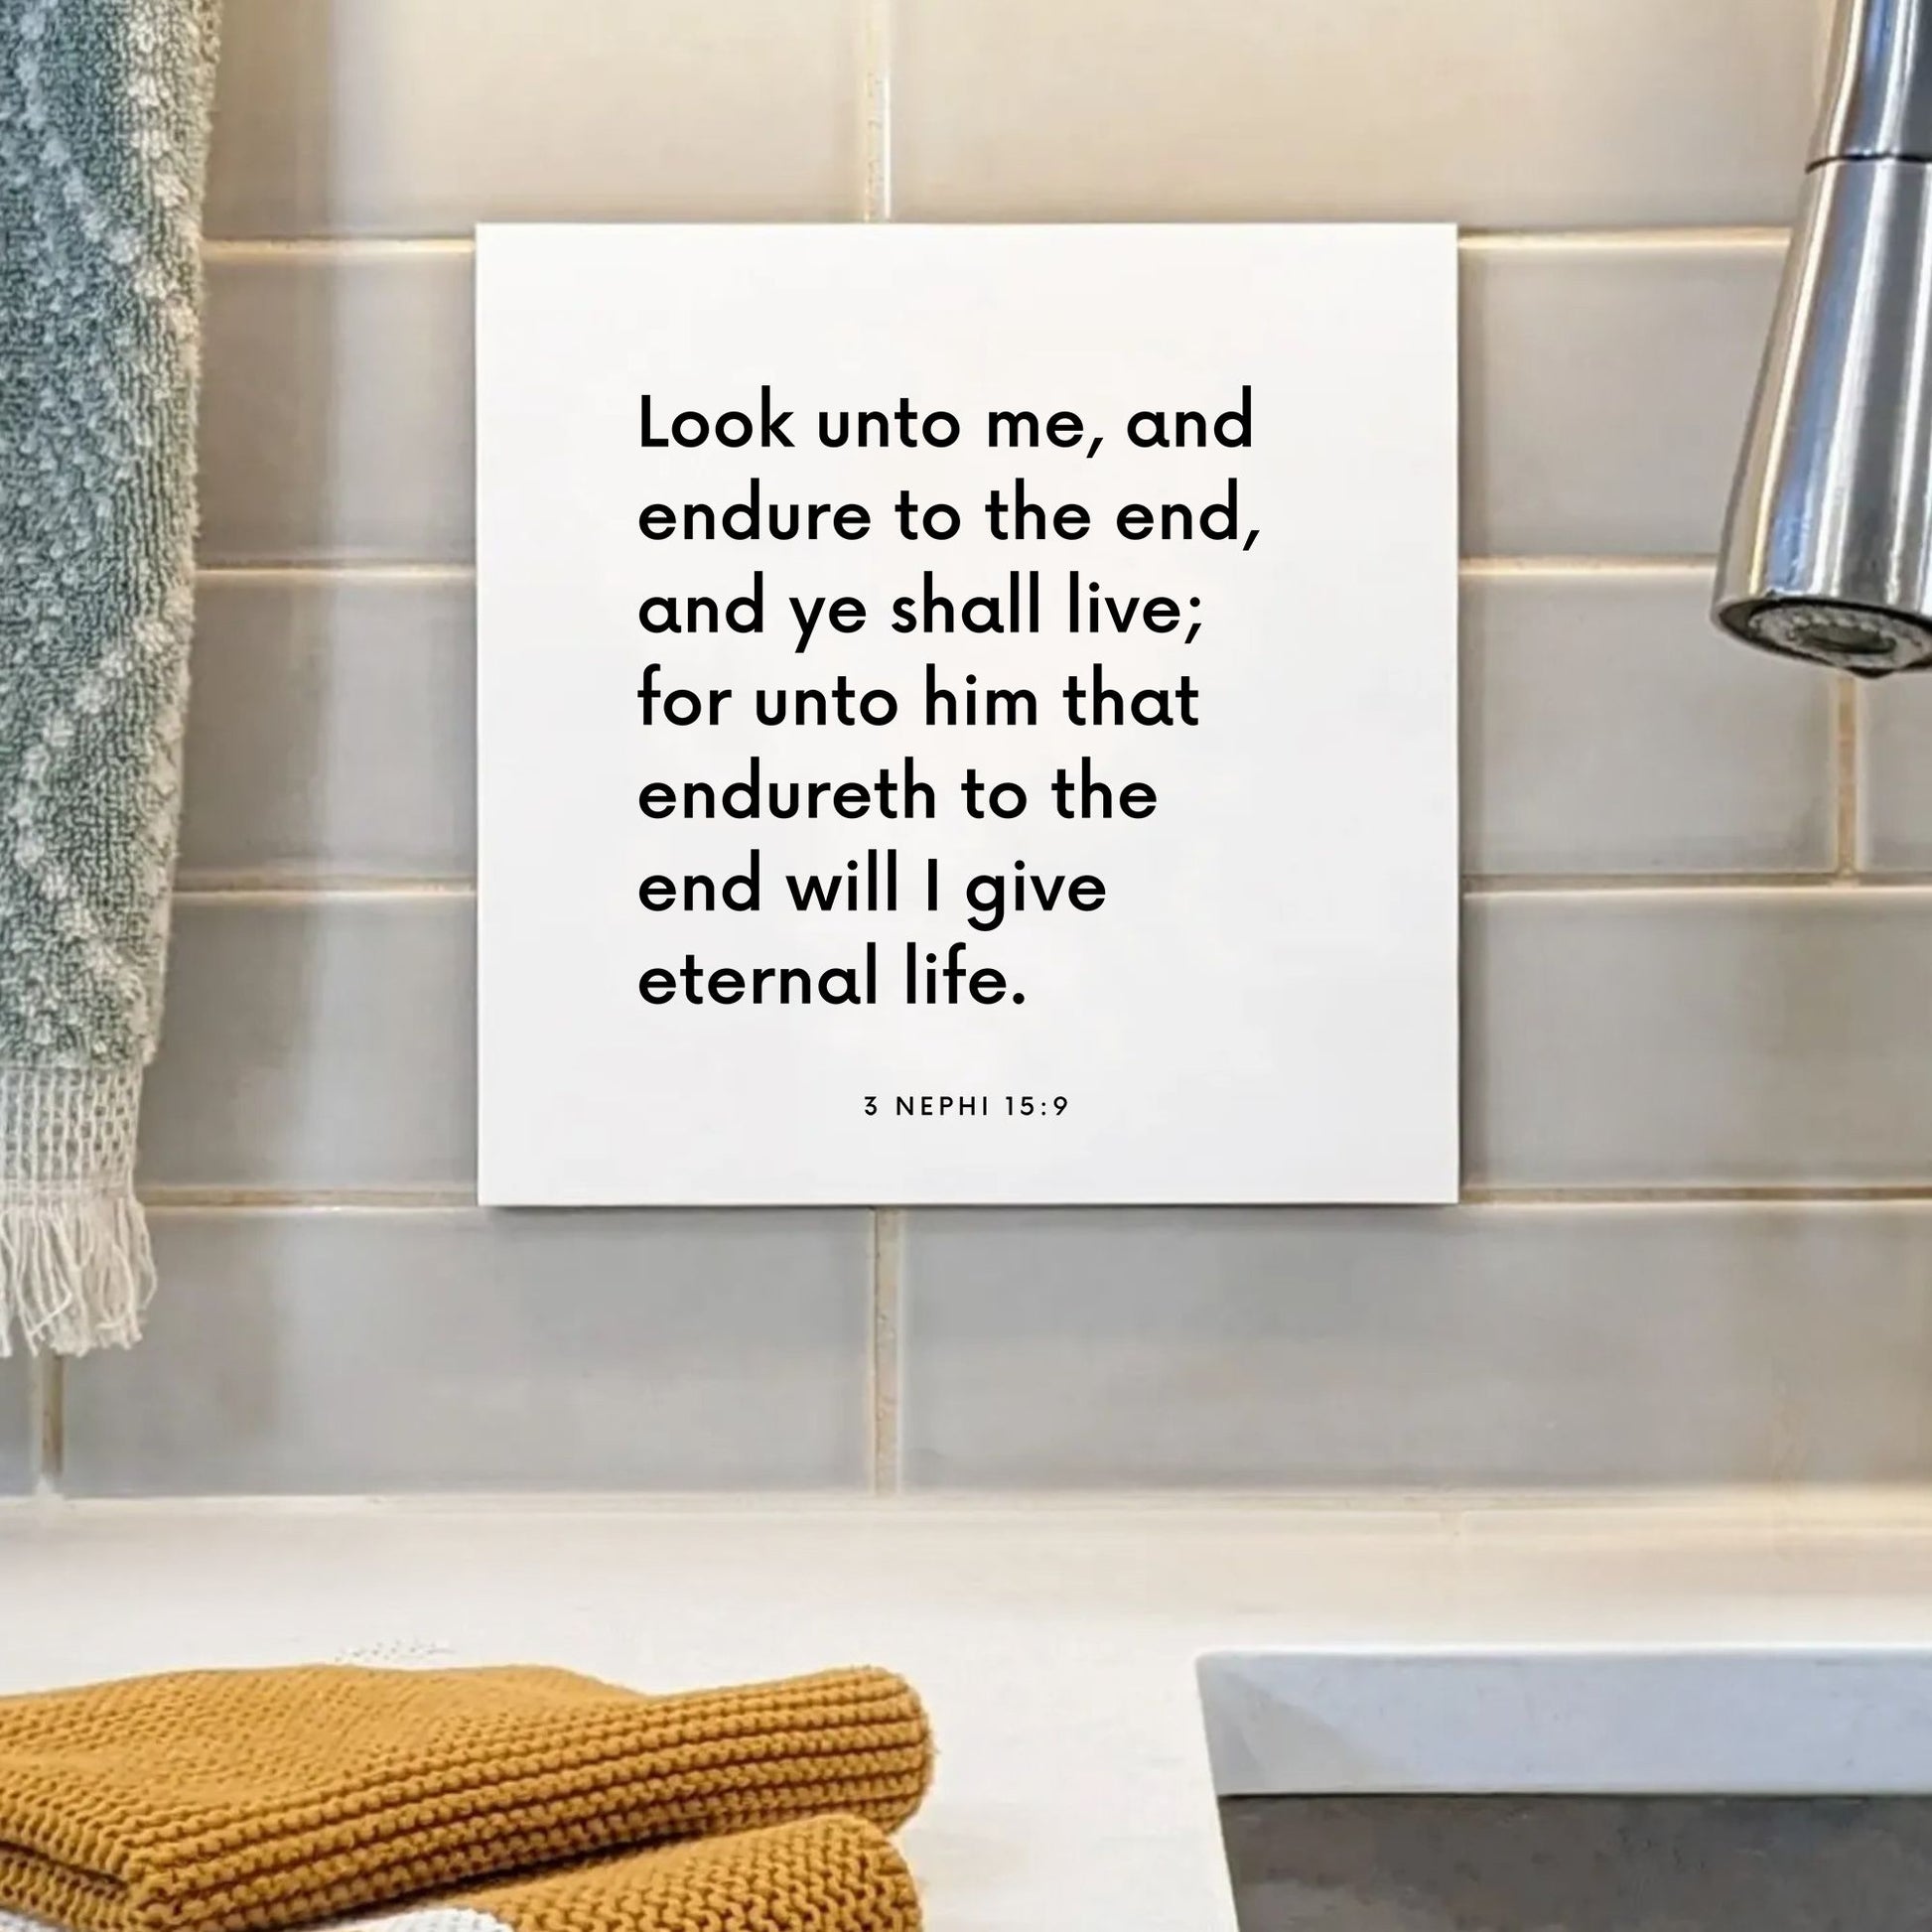 Sink mouting of the scripture tile for 3 Nephi 15:9 - "Look unto me, and endure to the end, and ye shall live"